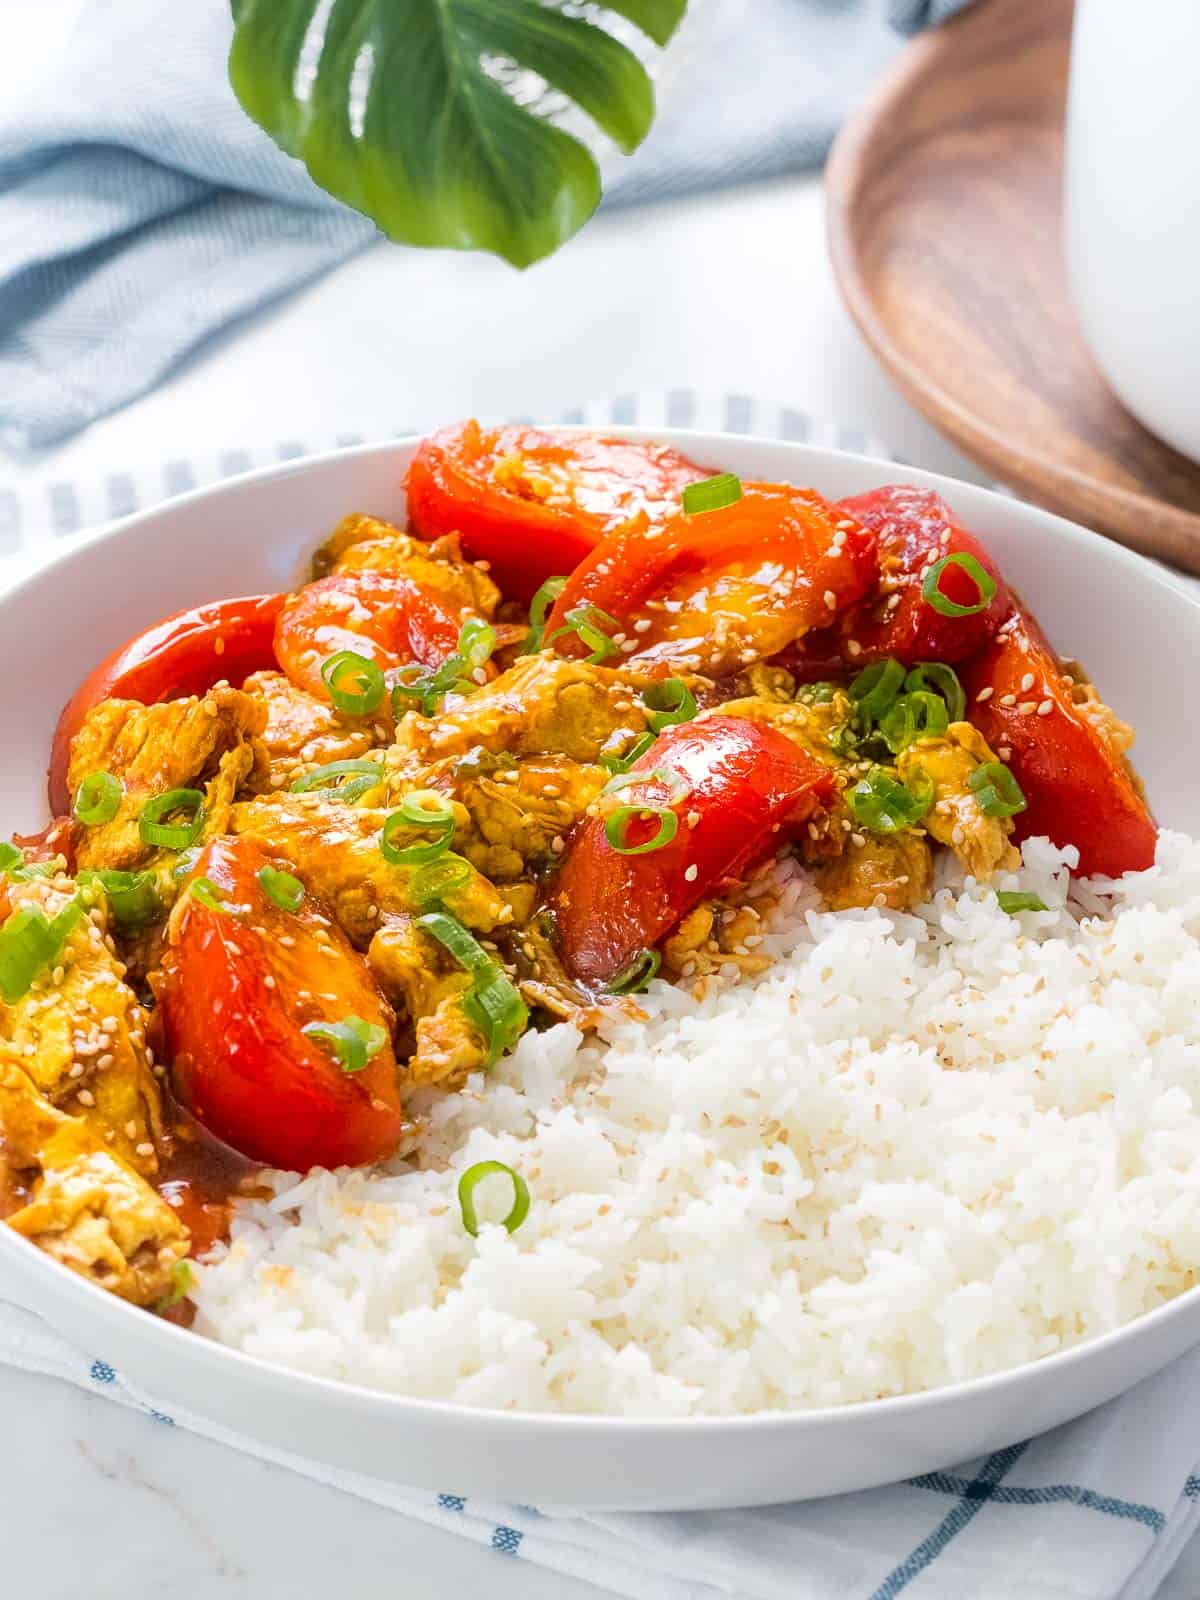 Chinese tomato egg stir fry served with rice and garnished with green onions.